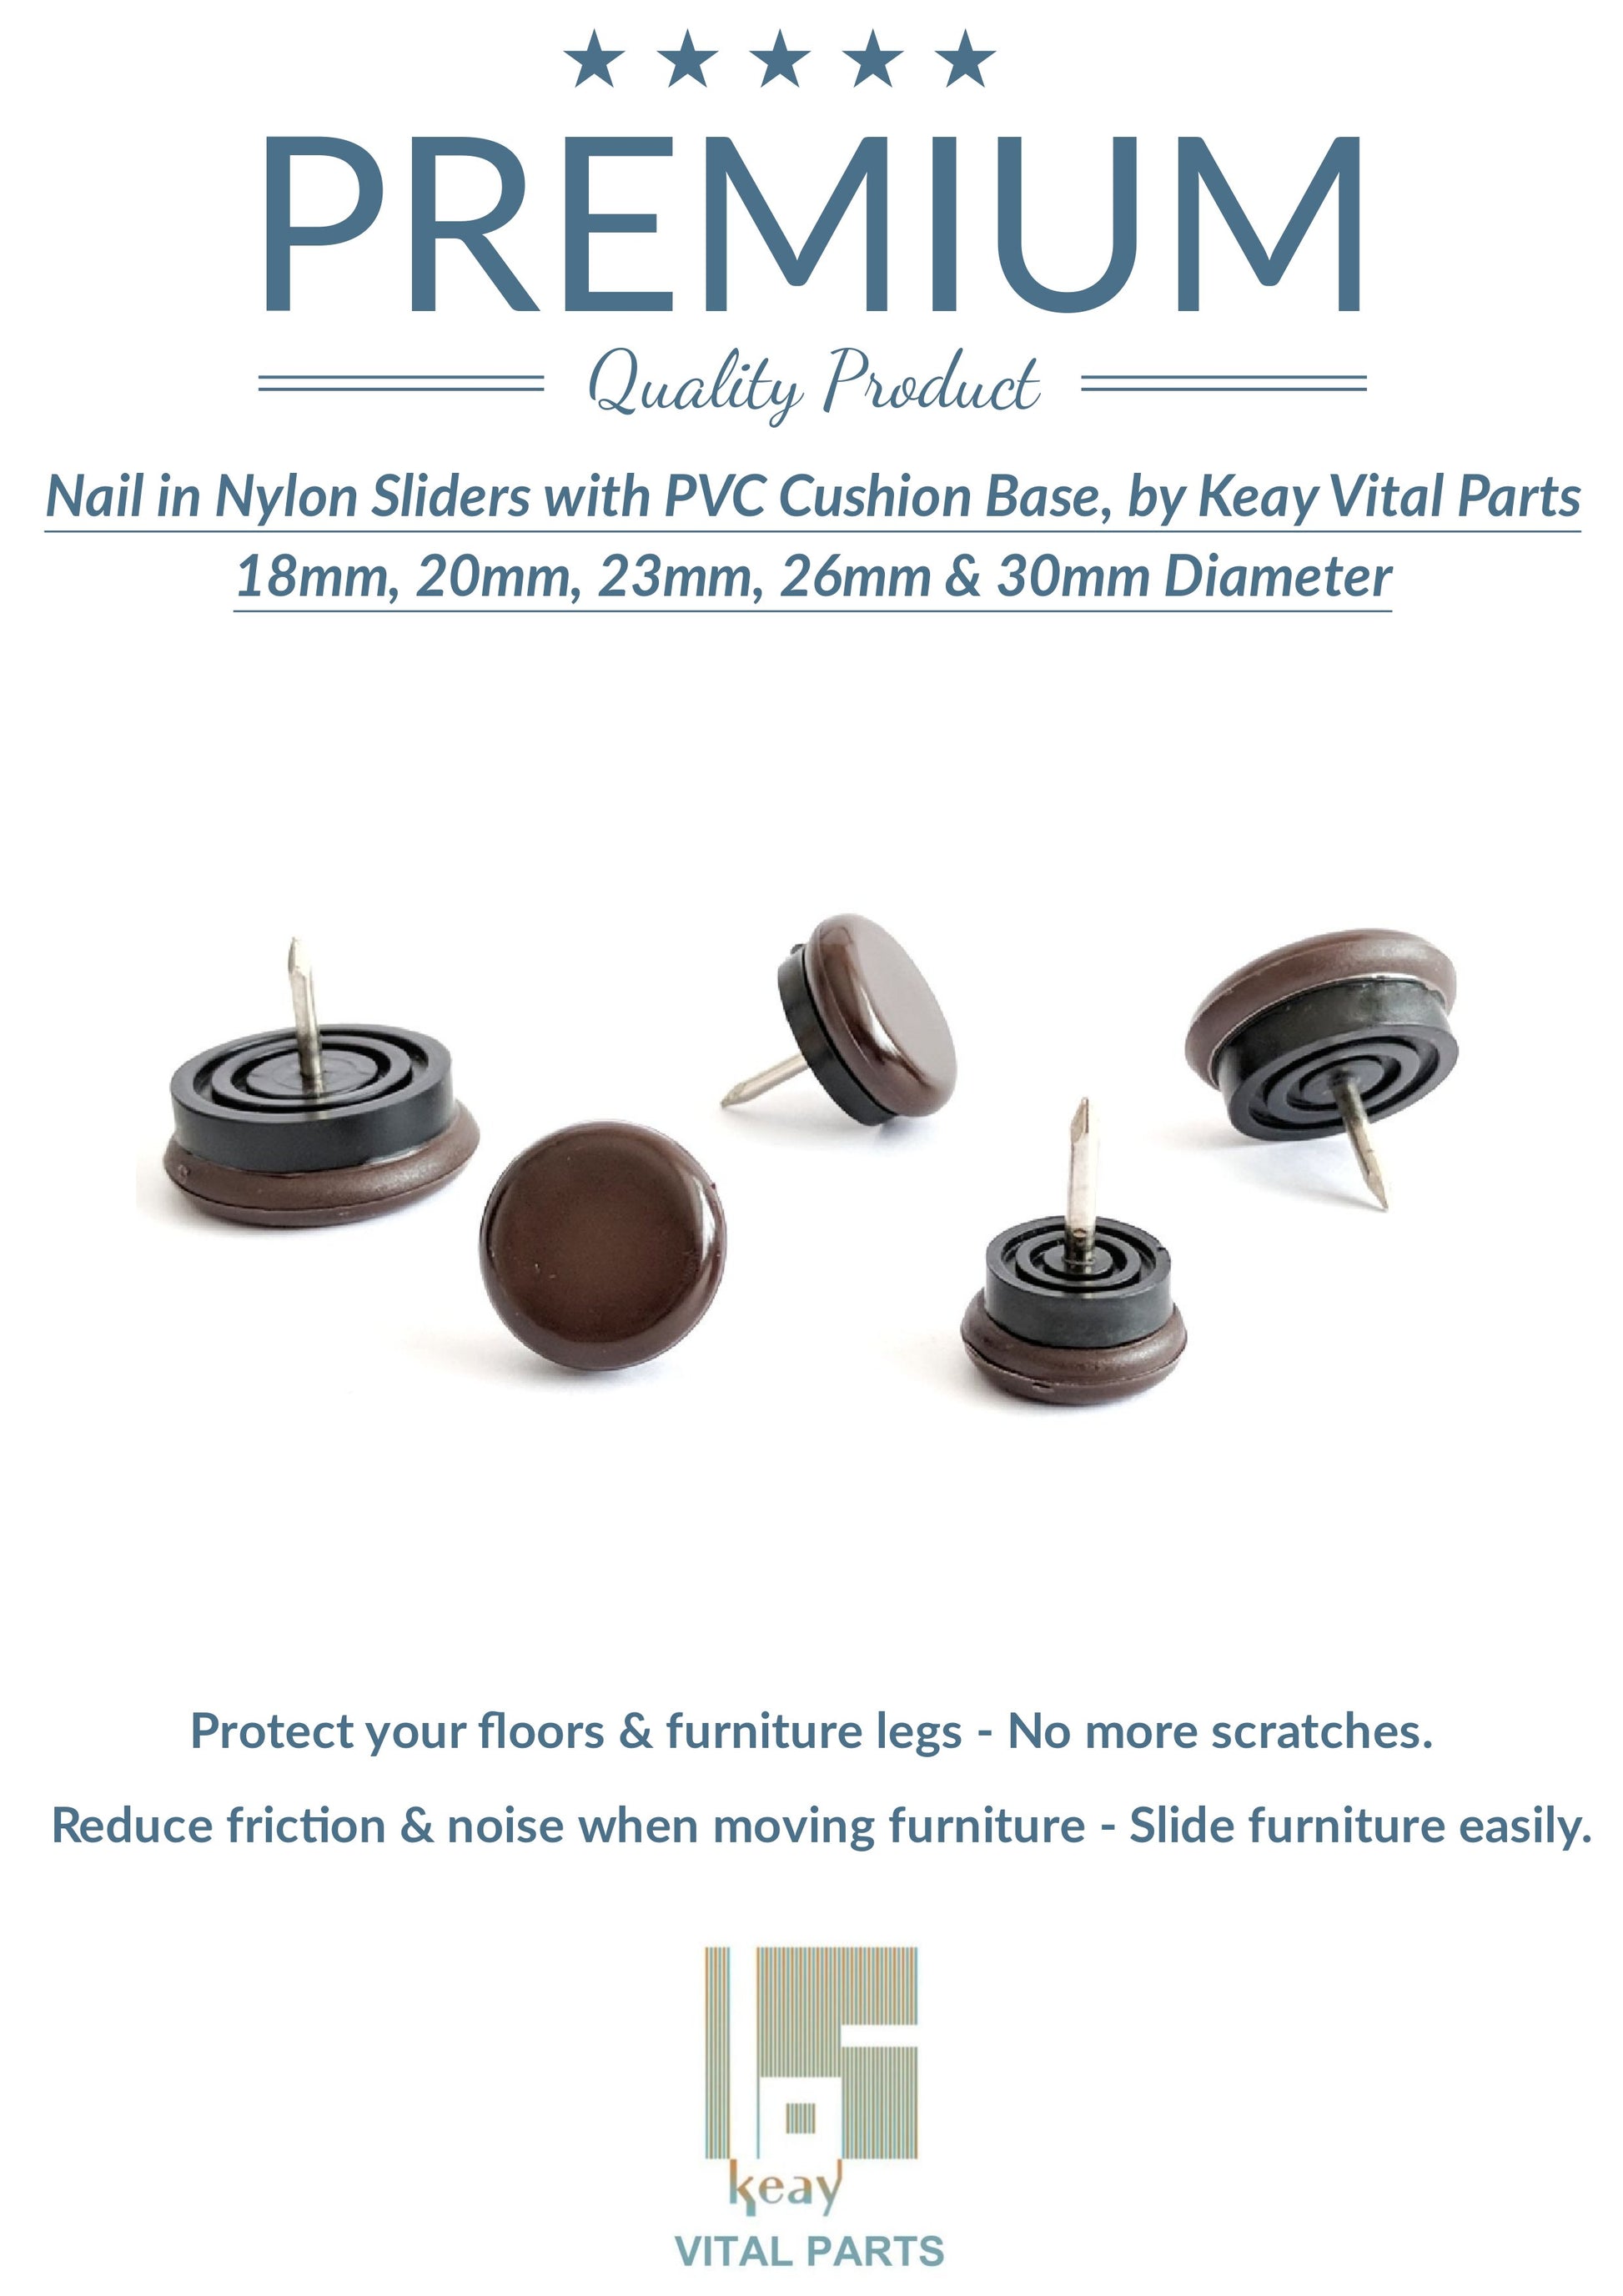 23mm Nylon Furniture Gliders Nail in Brown  - Made in Germany - Keay Vital Parts